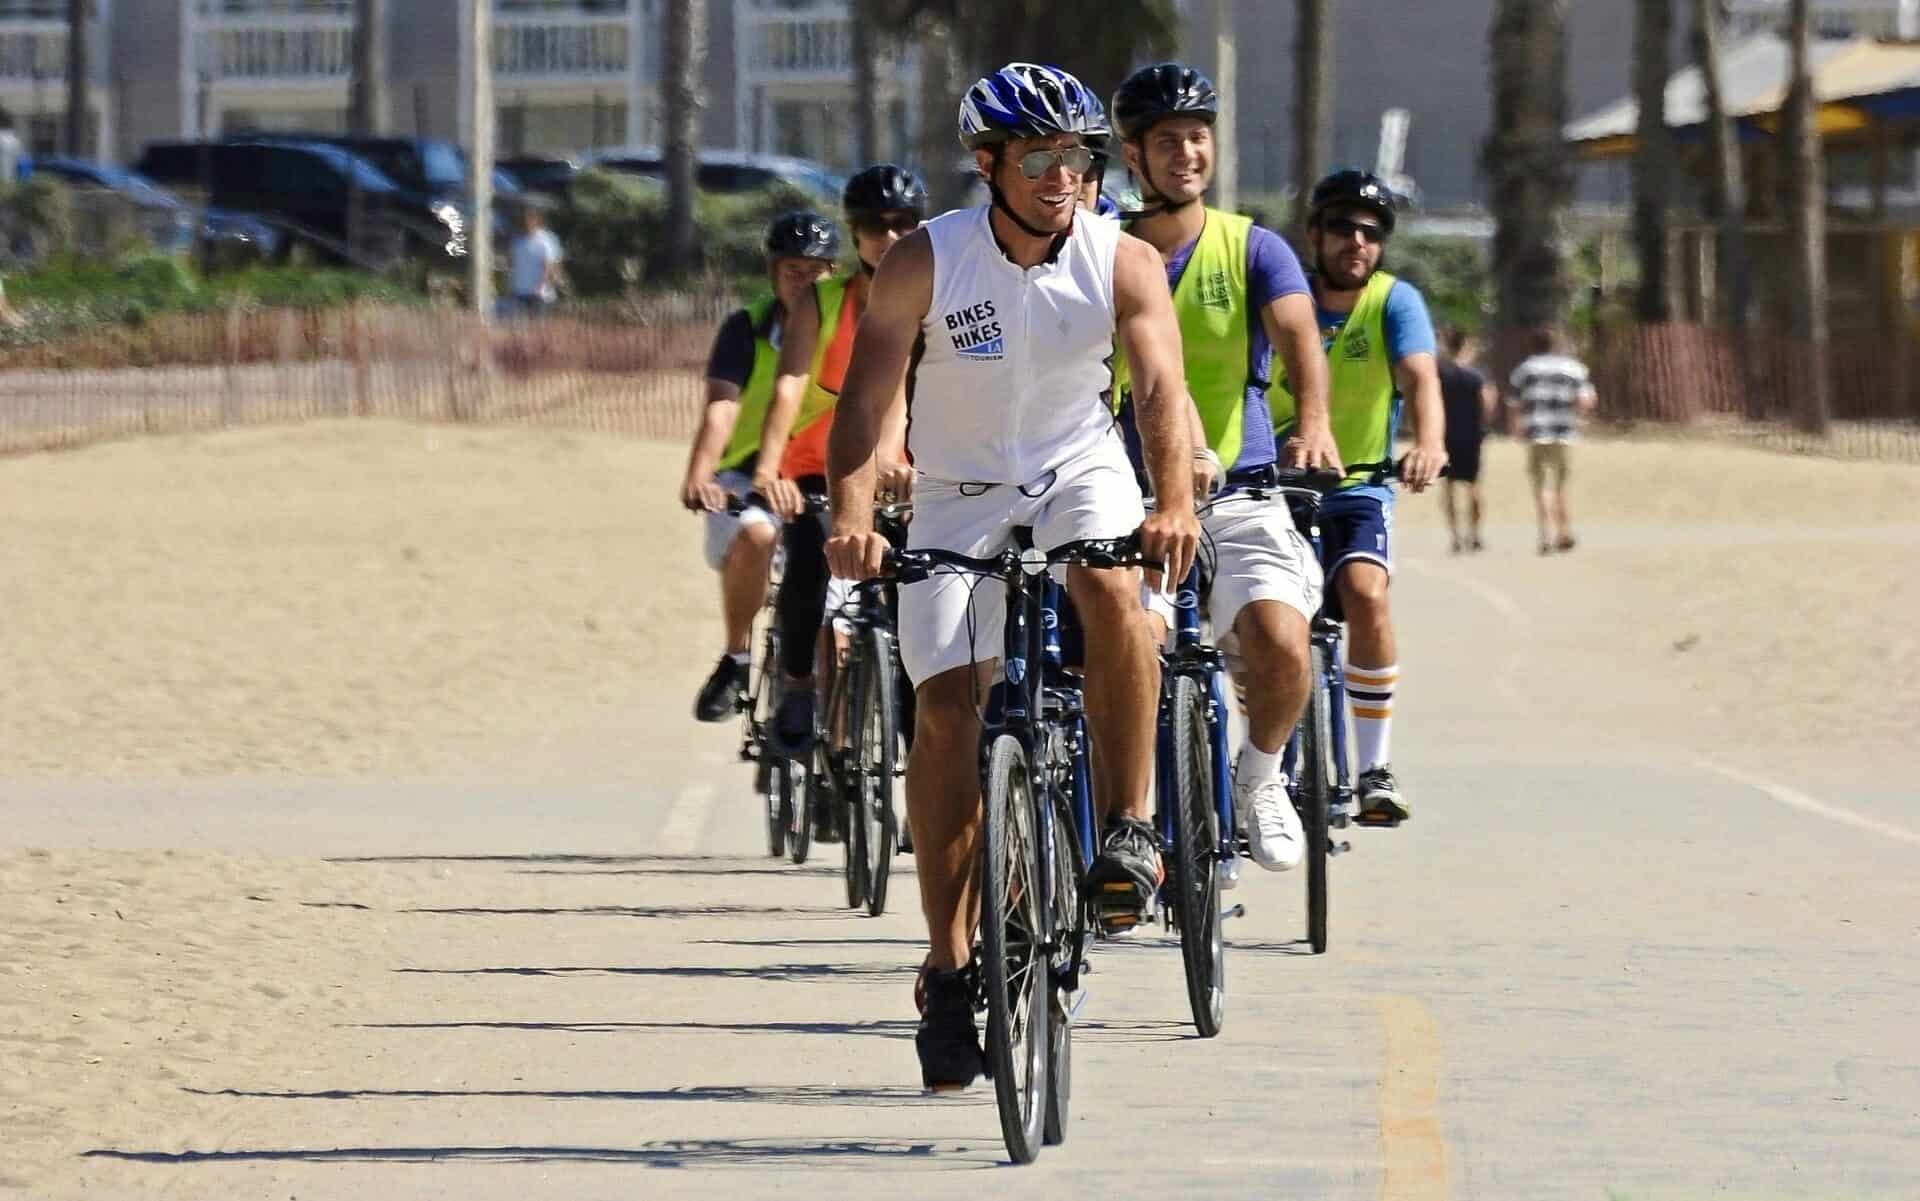 Riders cycle along Venice Beach in Los Angeles, California